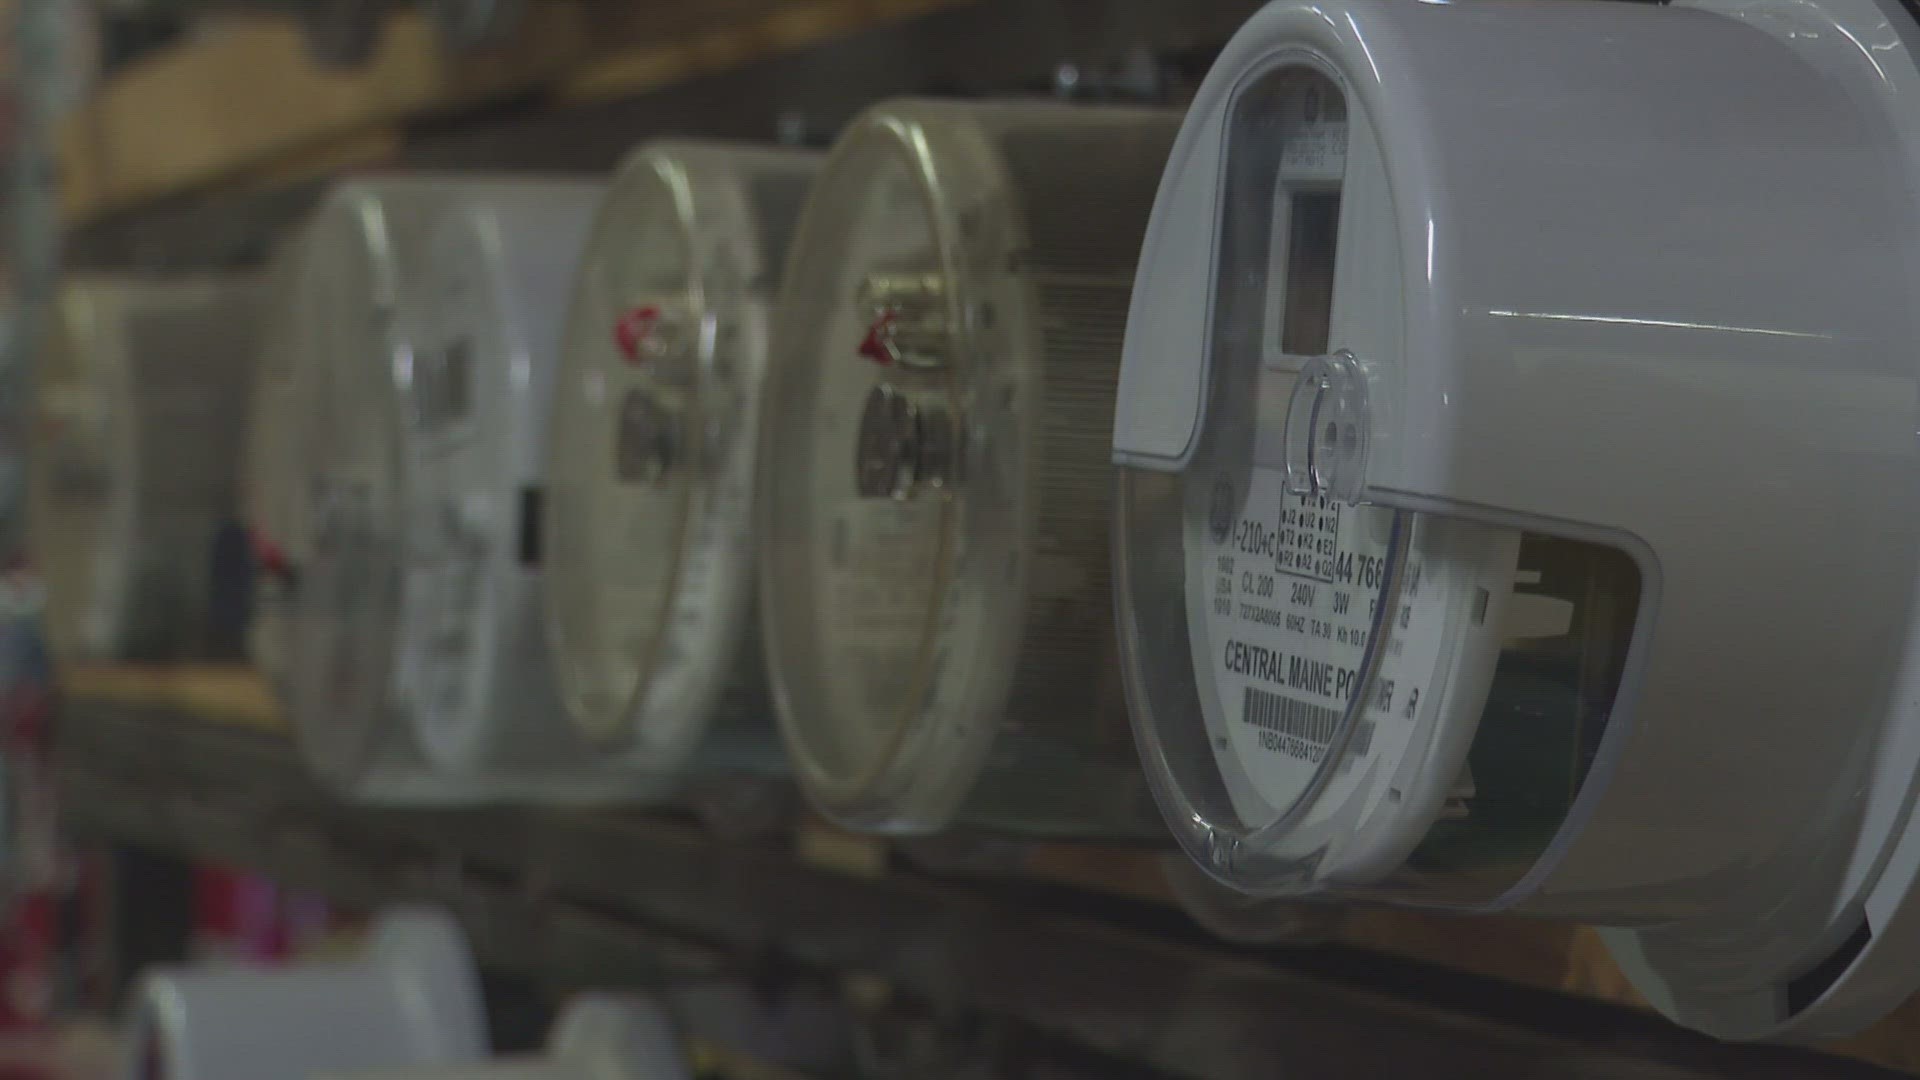 The new policy will now allow Maine licensed electricians to disconnect or reconnect residential power meters themselves rather than a CMP employee.